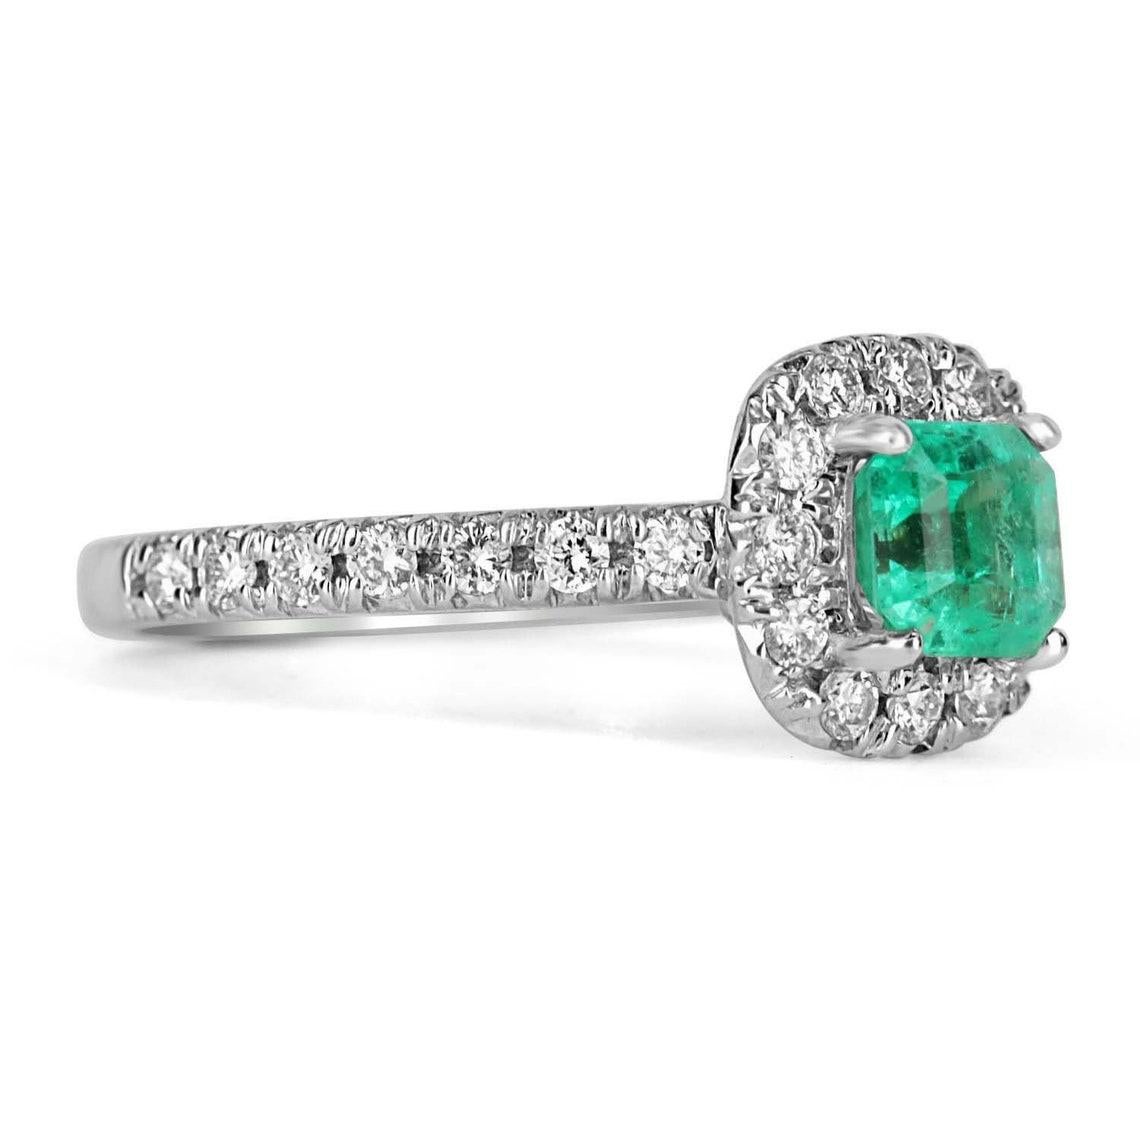 This is an exquisite, Colombian emerald and diamond halo ring. The gorgeous setting lets sit an excellent quality Colombian emerald with beautiful color and very good eye clarity. The emerald is not perfect and small imperfections do exist as it is